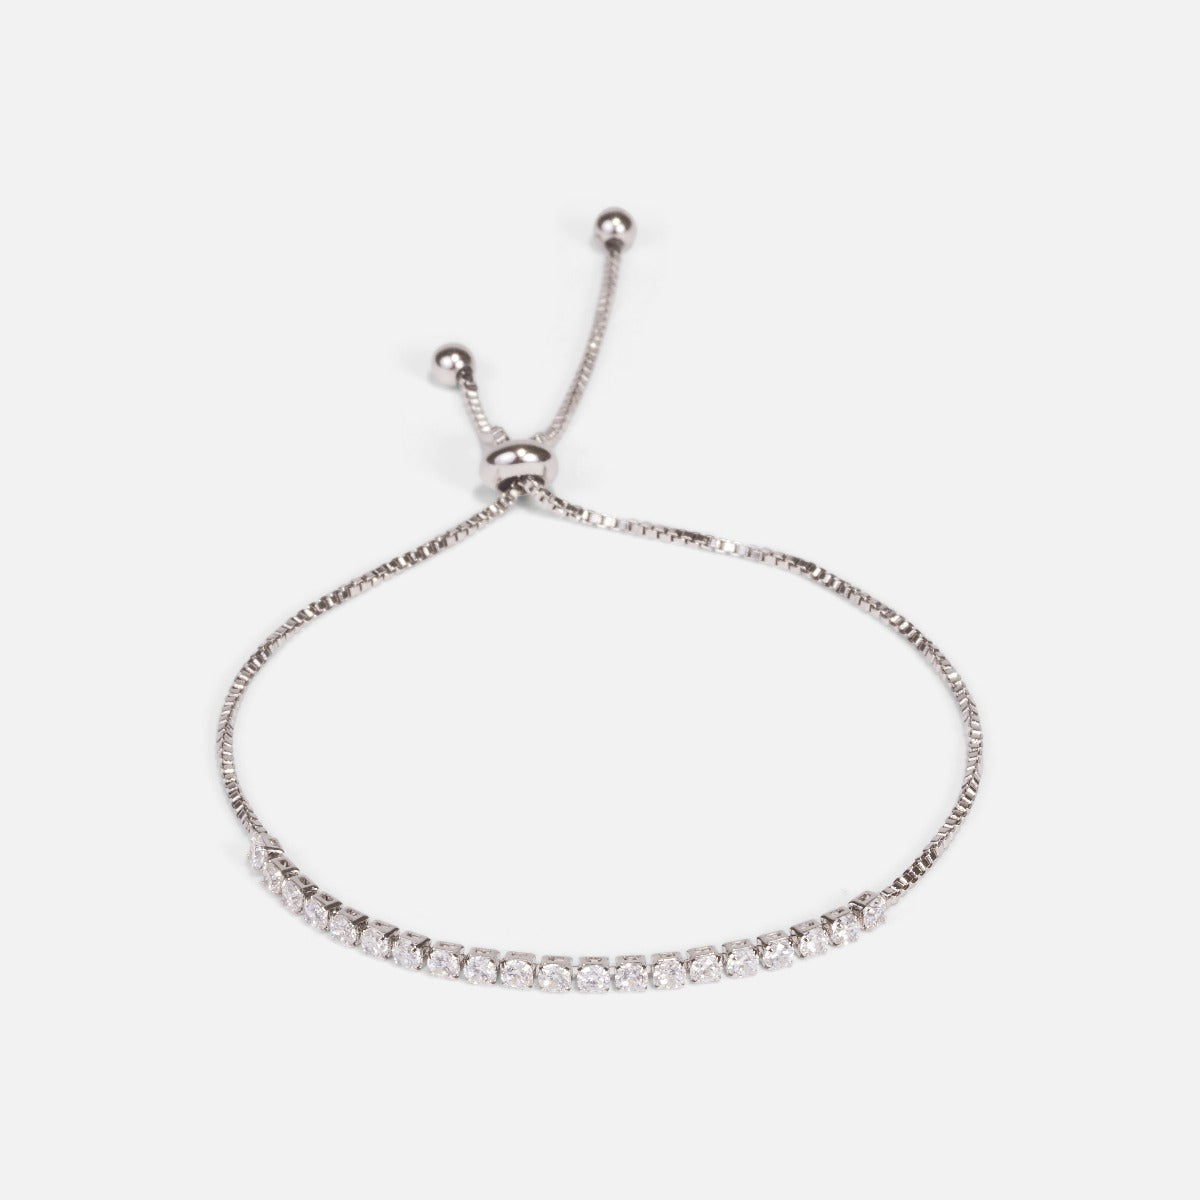 Adjustable bracelet with chain and small cubic zirconia stones